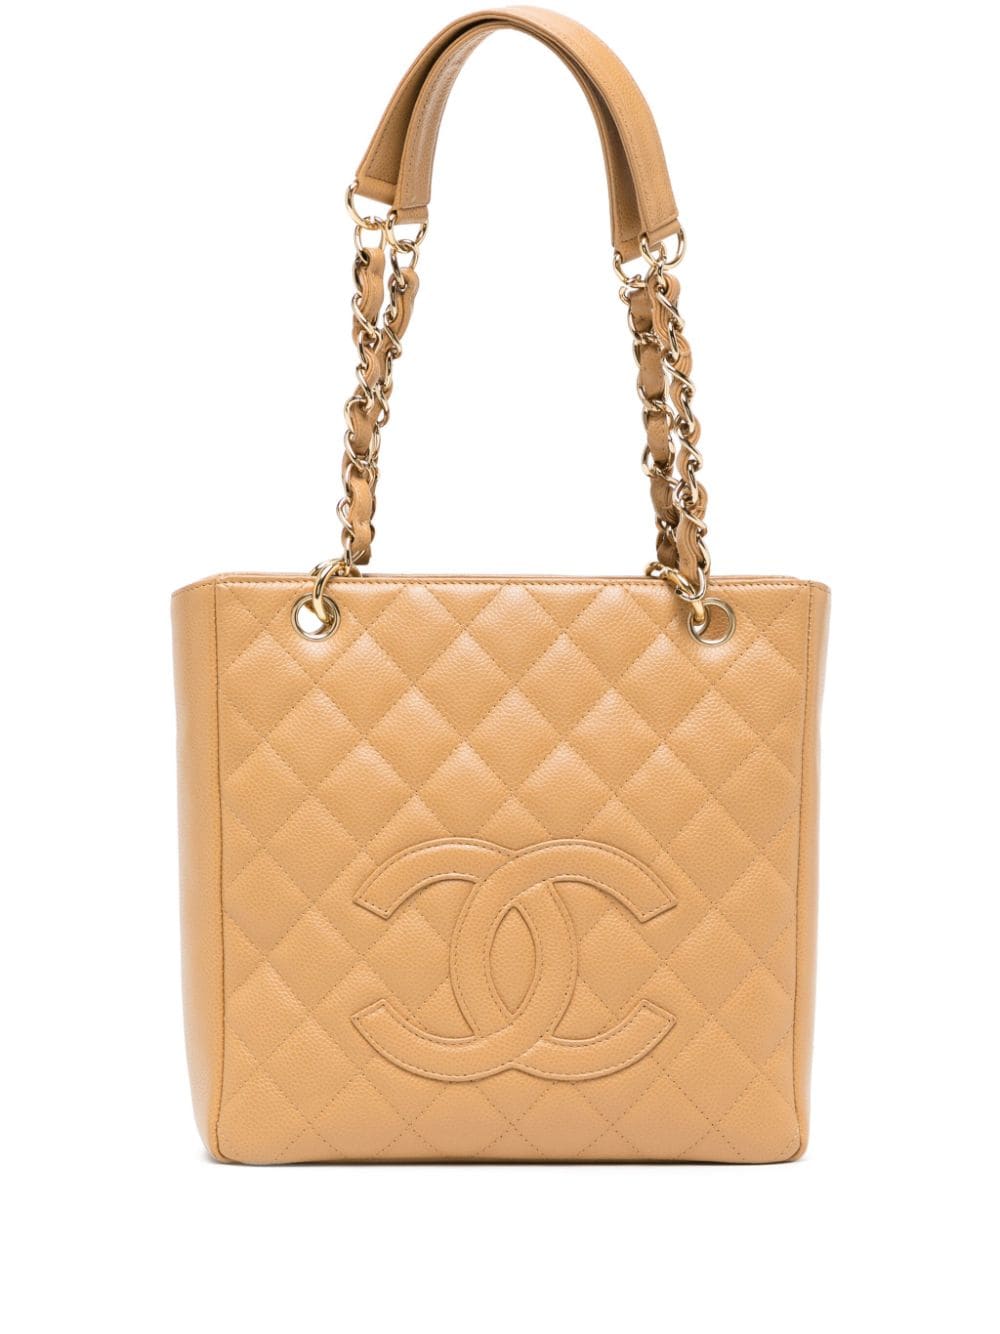 CHANEL Pre-Owned 2005 Petite Shopping Handtasche - Nude von CHANEL Pre-Owned